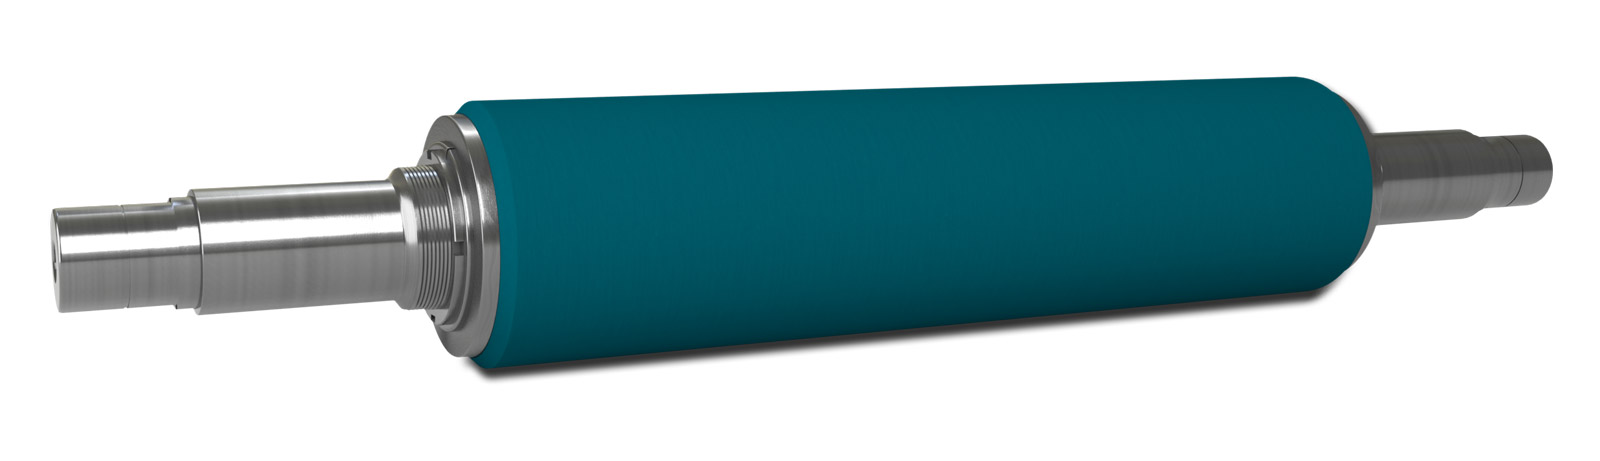 Perspective view of the NCCM<sup>®</sup> NT nonwoven roll on a metal shaft